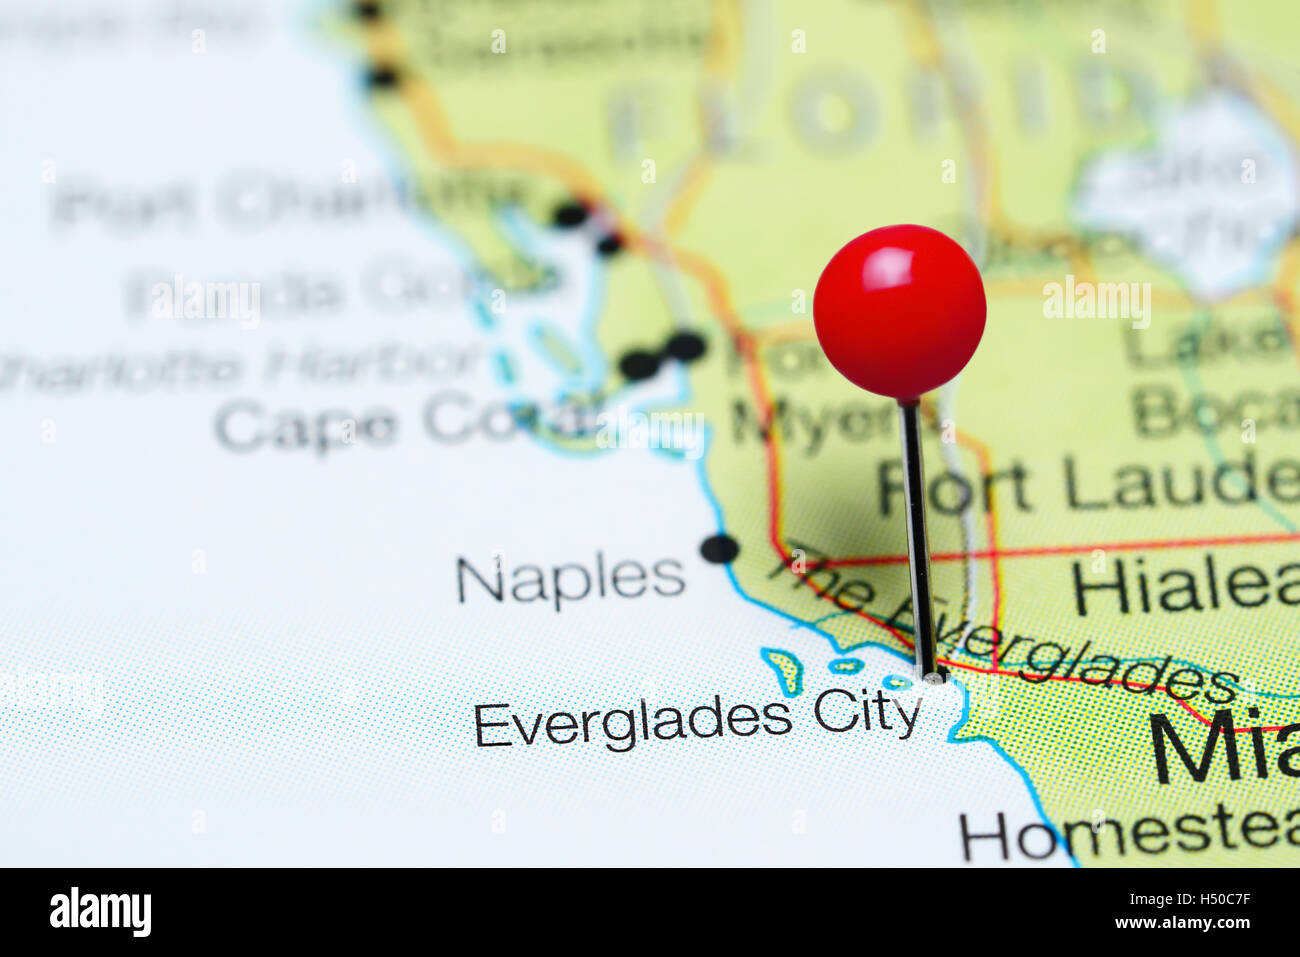 Everglades City pinned on a map of Florida, USA Stock Photo